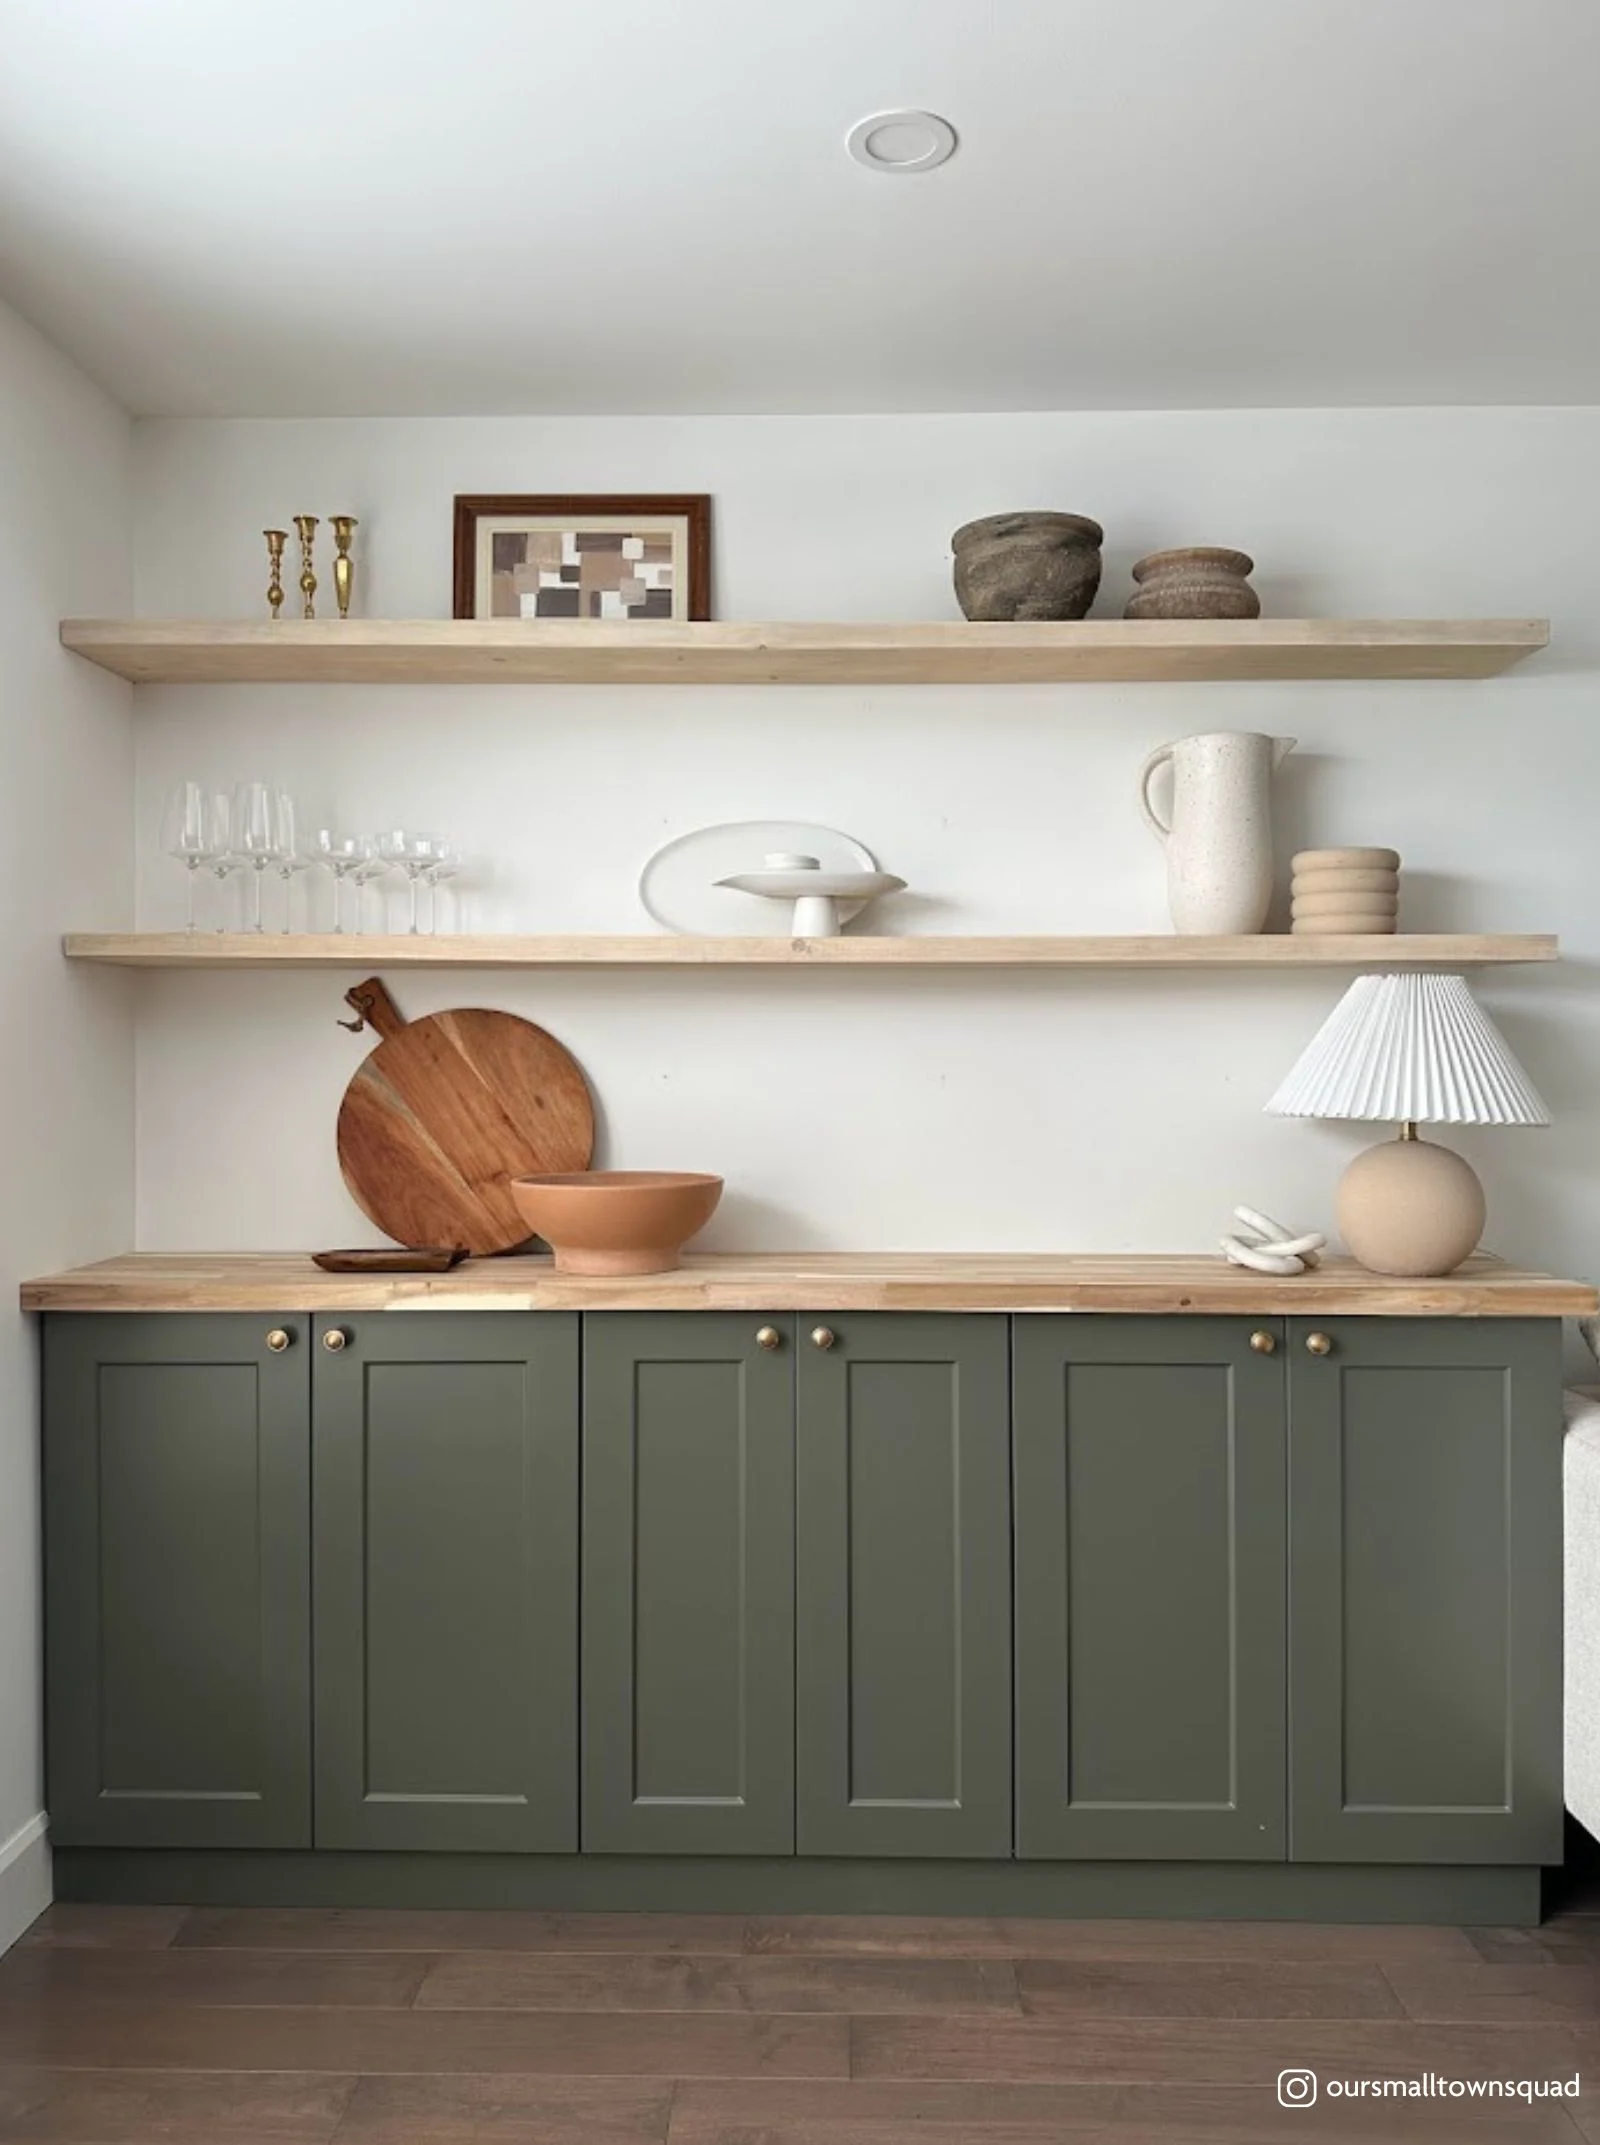 Here's How to Make Built-In Dining Room Cabinets with Floating Shelves